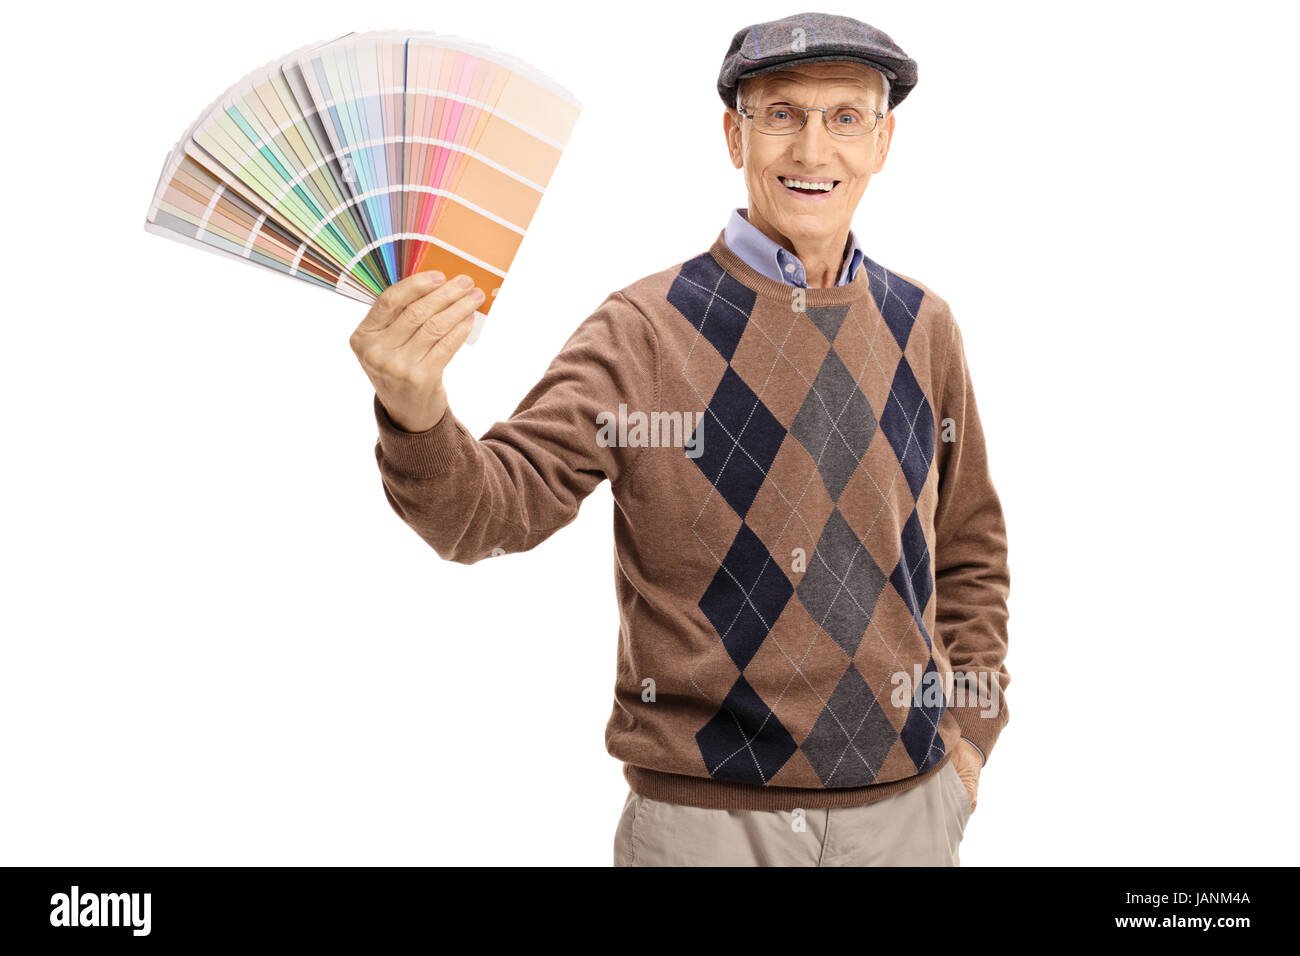 Elderly man holding a color swatch and looking at the camera isolated on white background Stock Photo